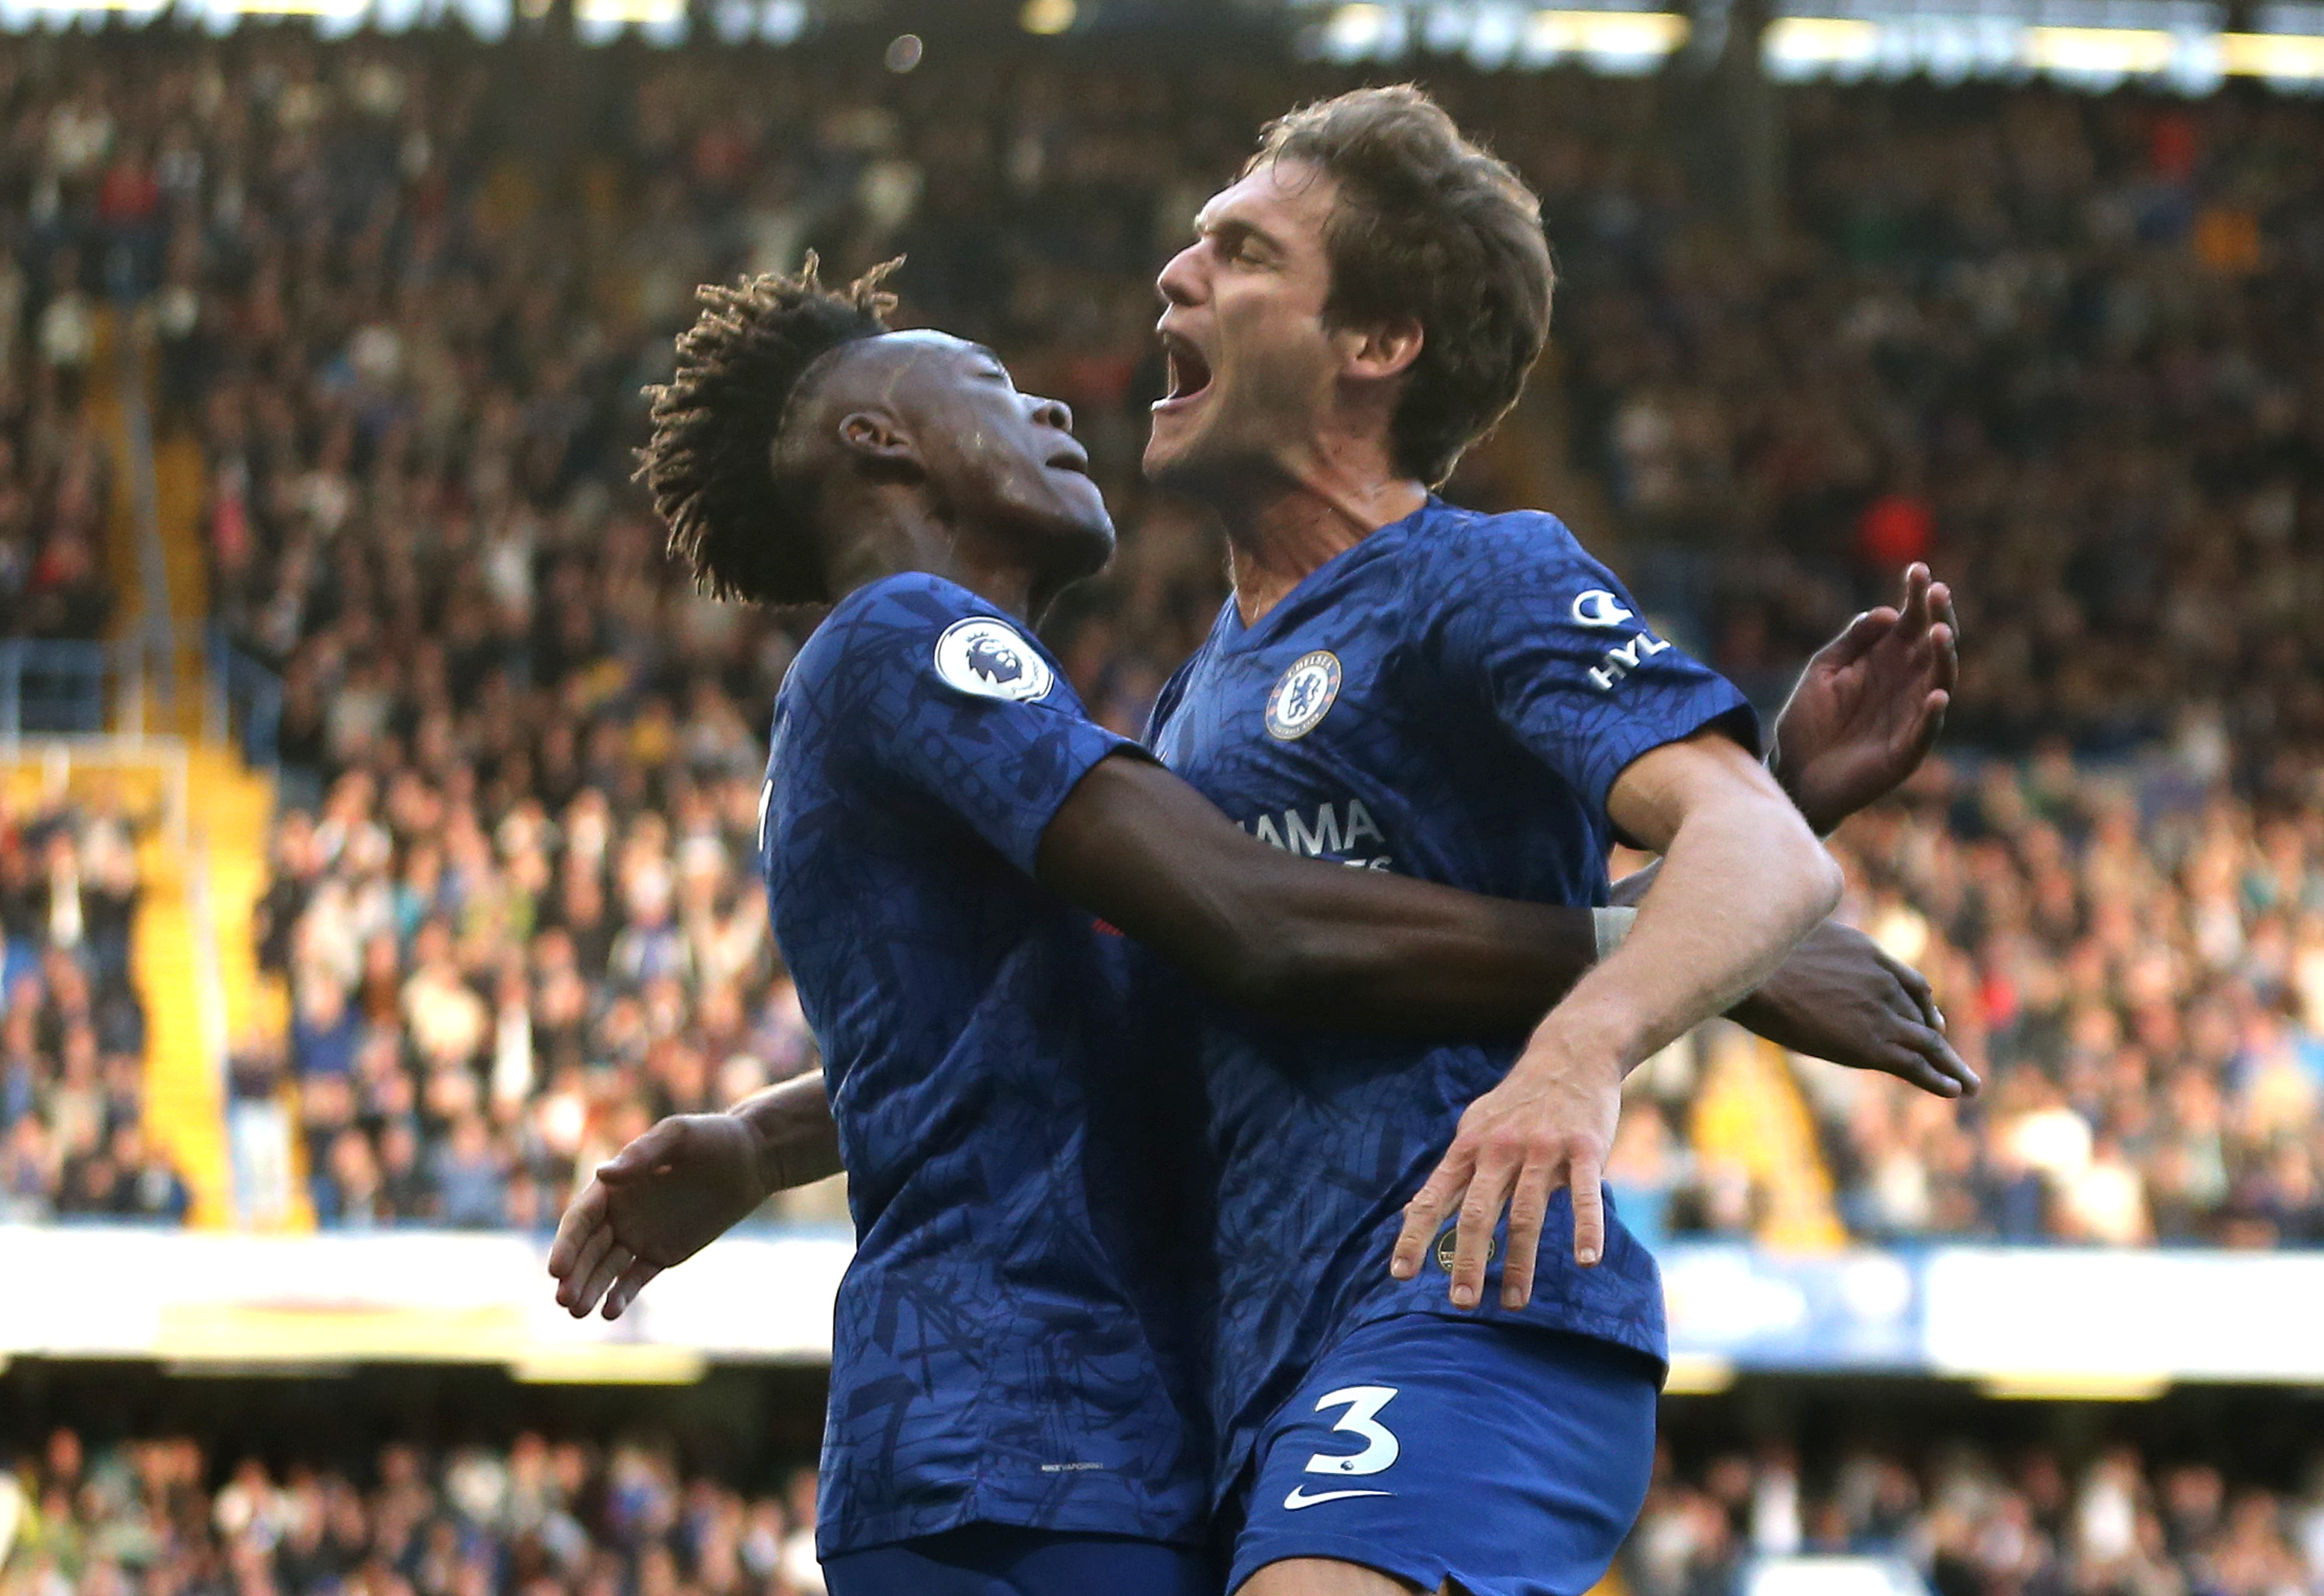 LONDON, ENGLAND - OCTOBER 19: Marcos Alonso of Chelsea celebrates with teammate Tammy Abraham after scoring his team's first goal during the Premier League match between Chelsea FC and Newcastle United at Stamford Bridge on October 19, 2019 in London, United Kingdom. (Photo by Paul Harding/Getty Images)